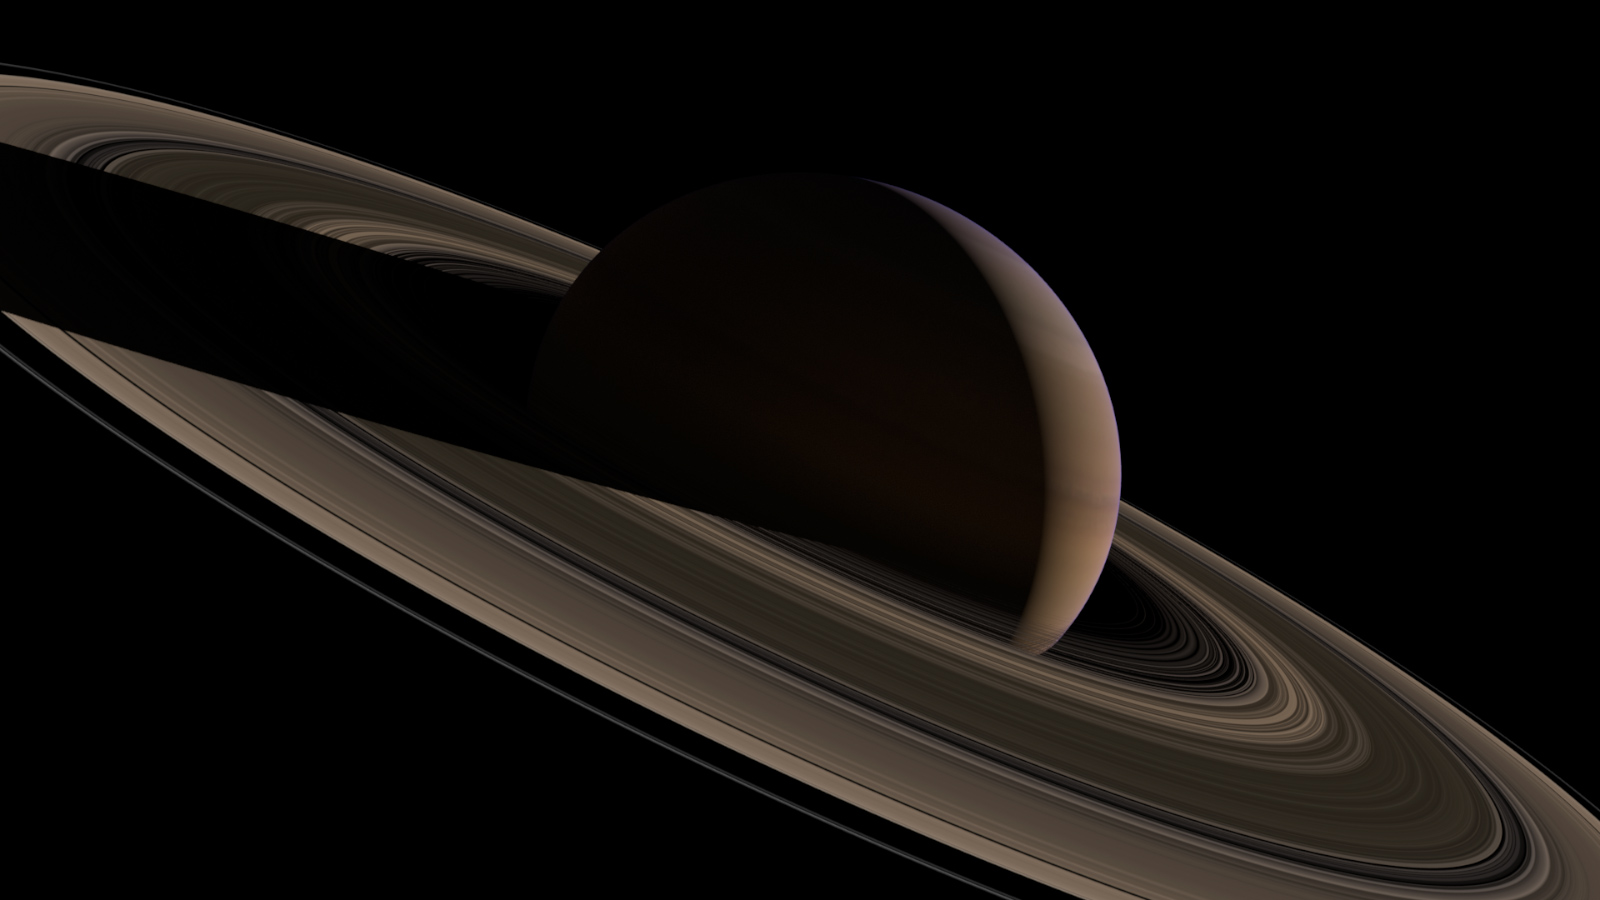 slide 4 - Saturn and its rings illuminated by the Sun.